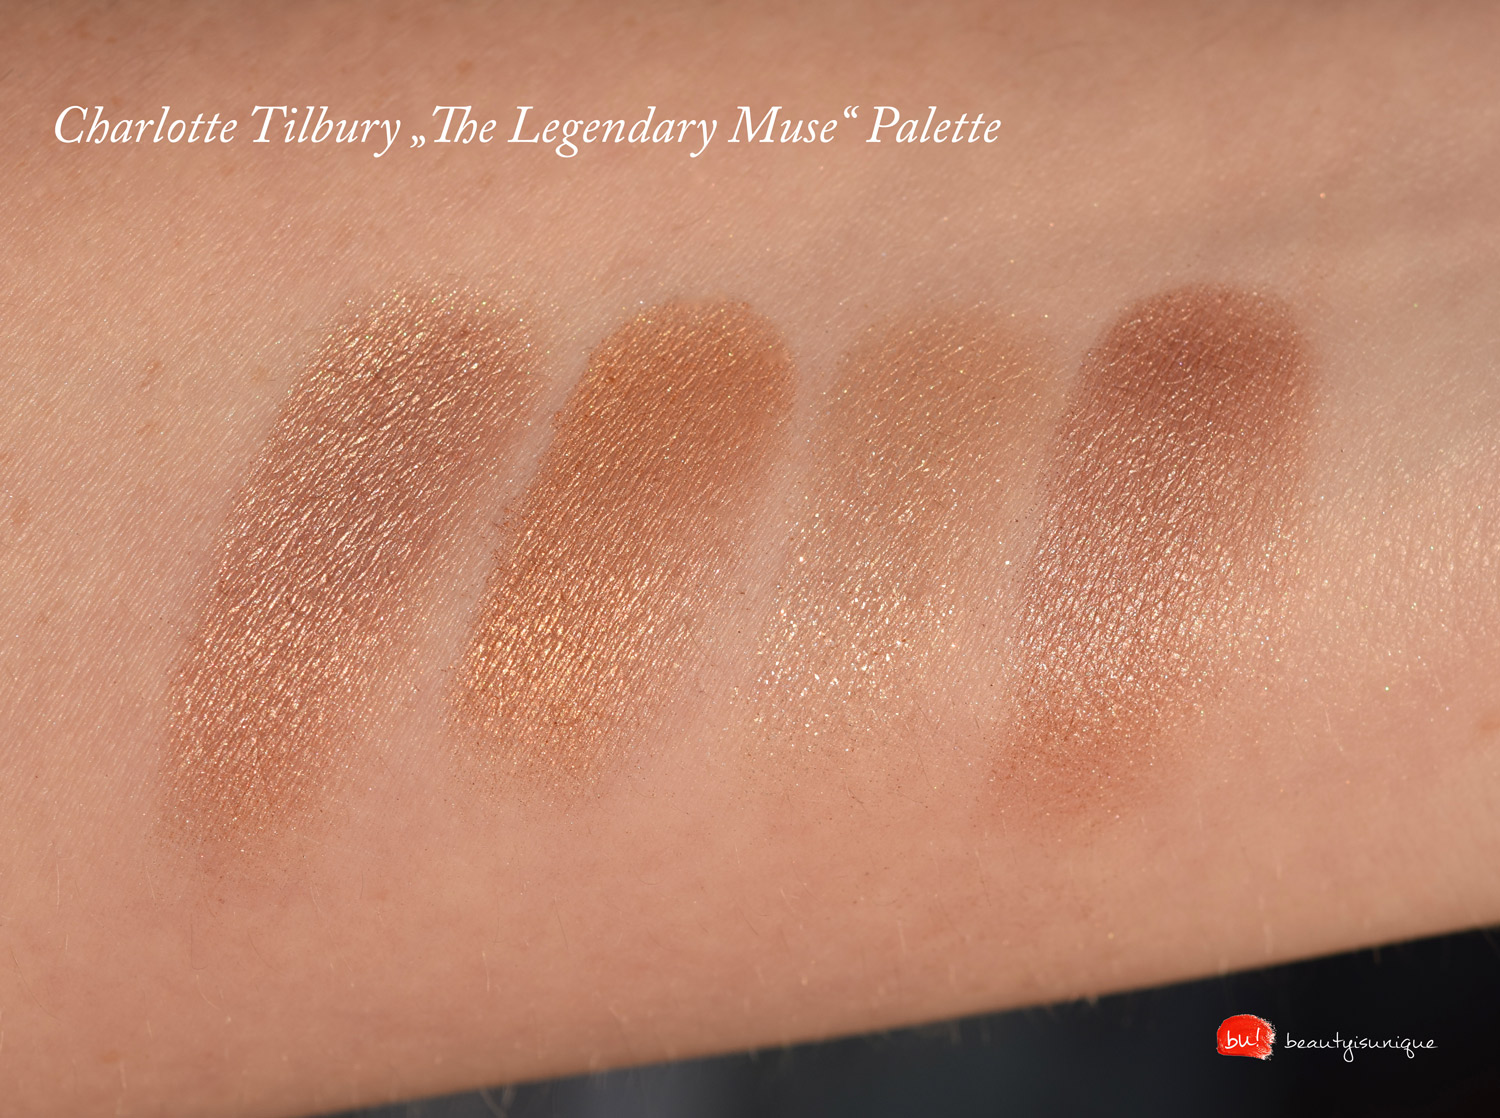 Charlotte-tilbury-the-legendary-muse-swatches